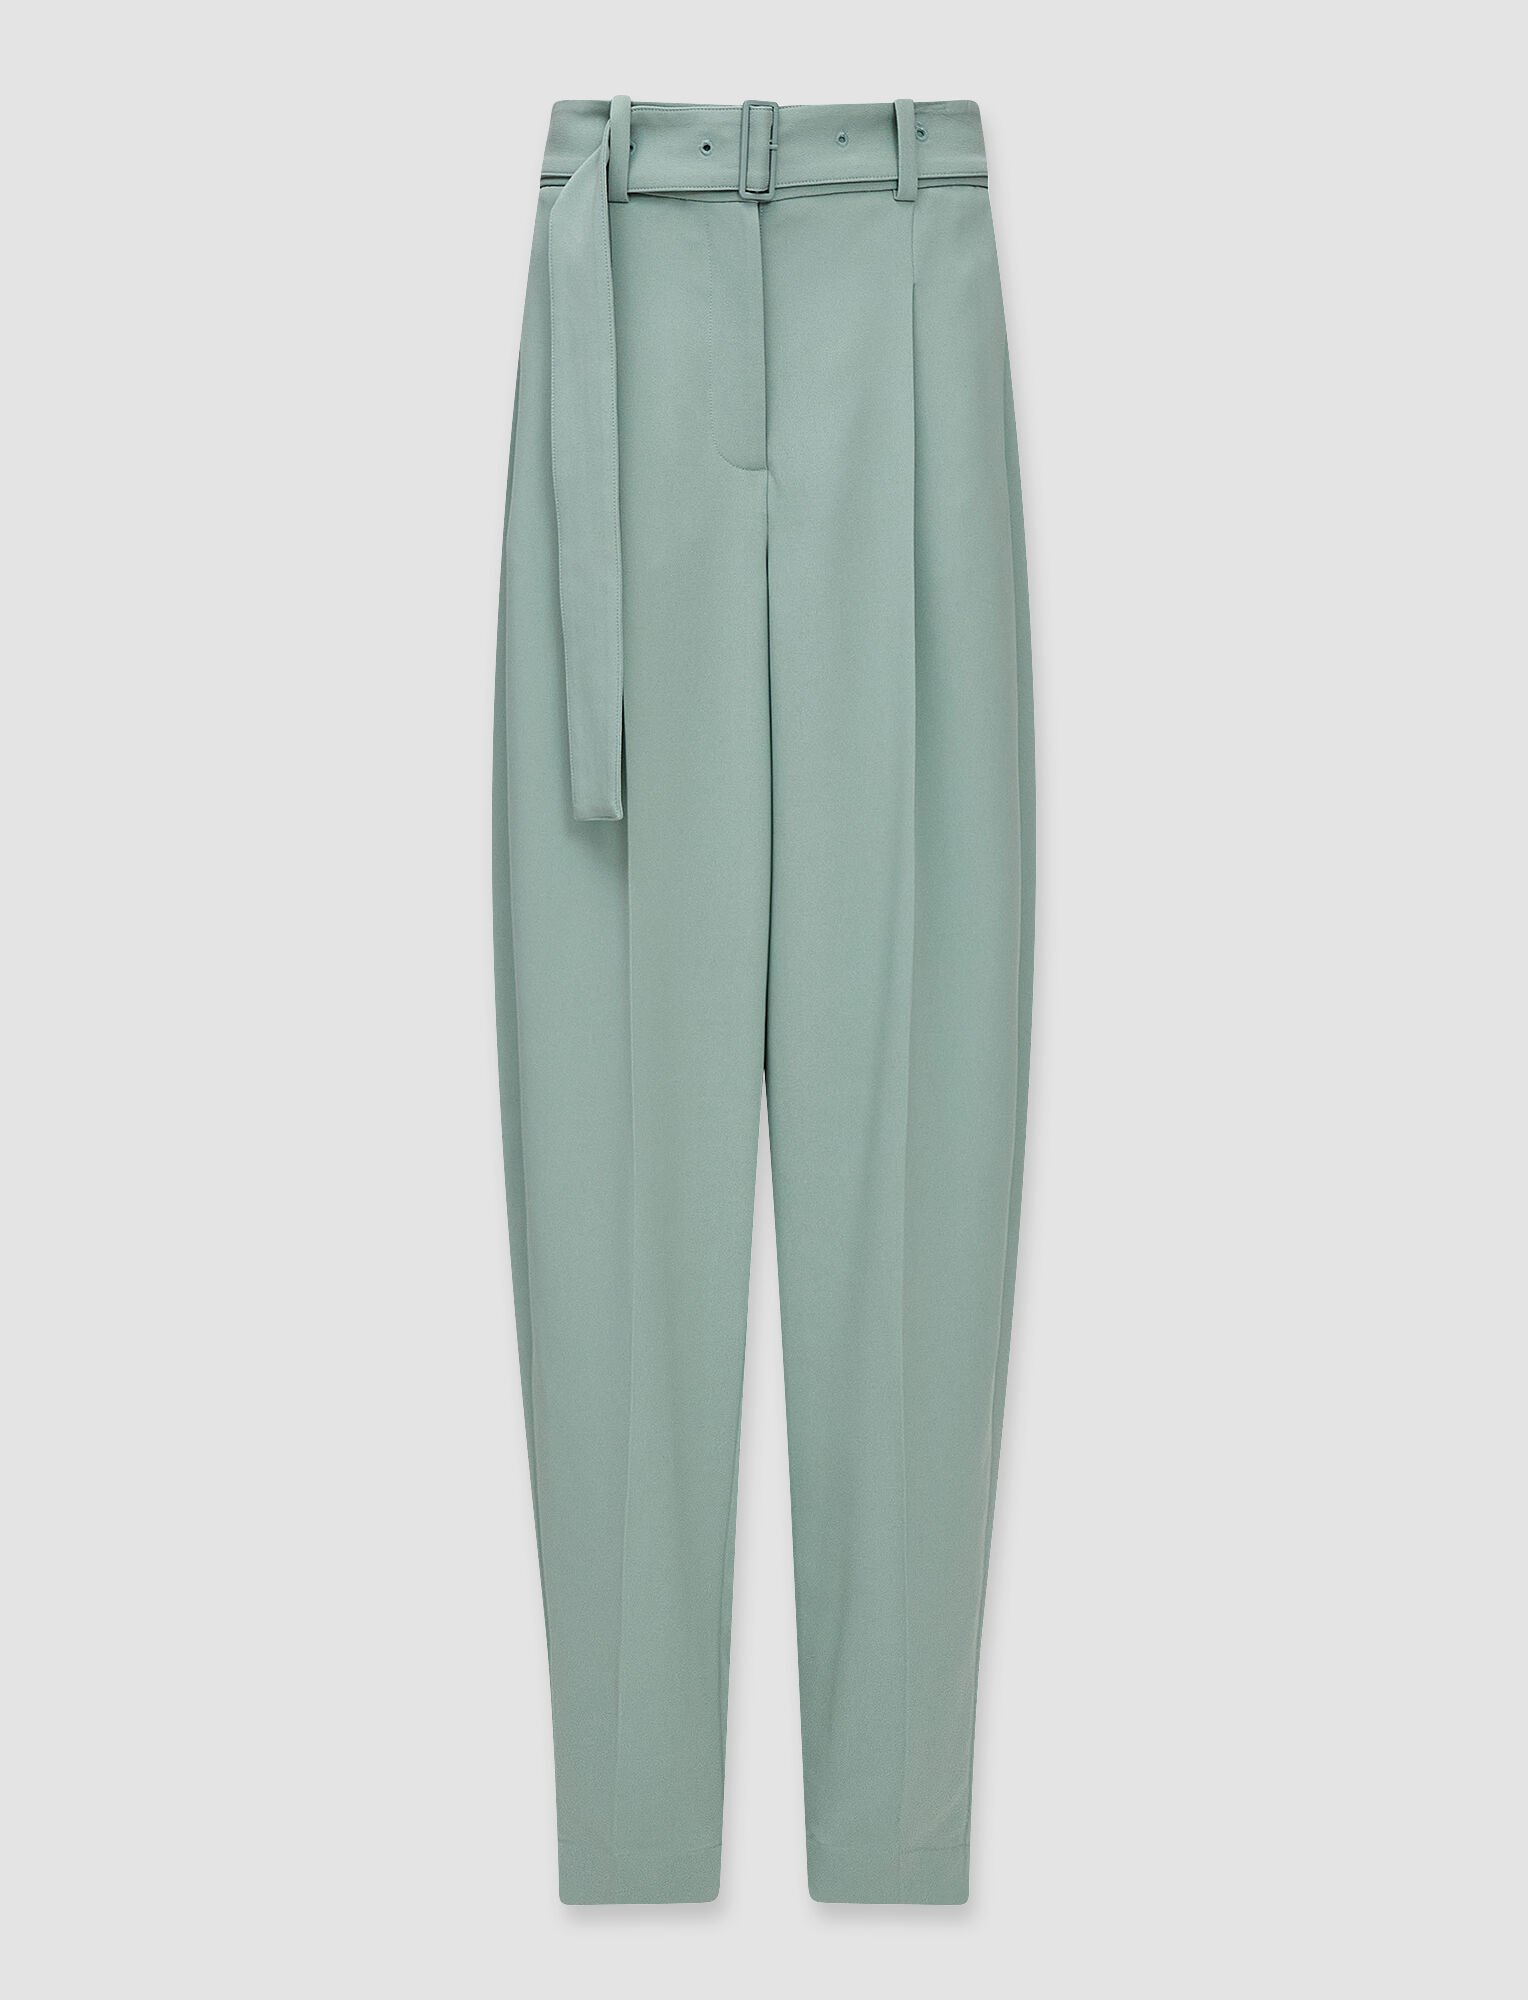 Comfort Cady Drew Trousers in Green JOSEPH US